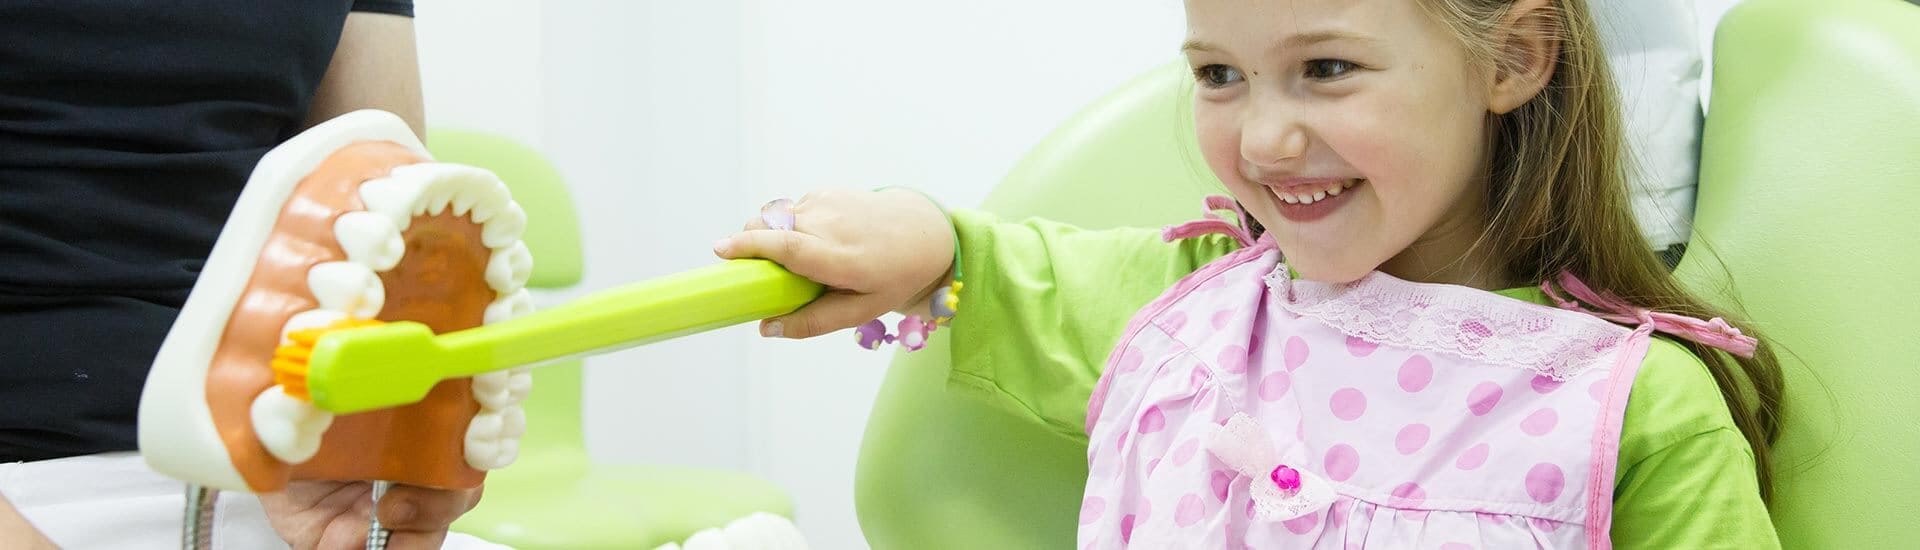 When Should You First Take Your Child to the Dentist?